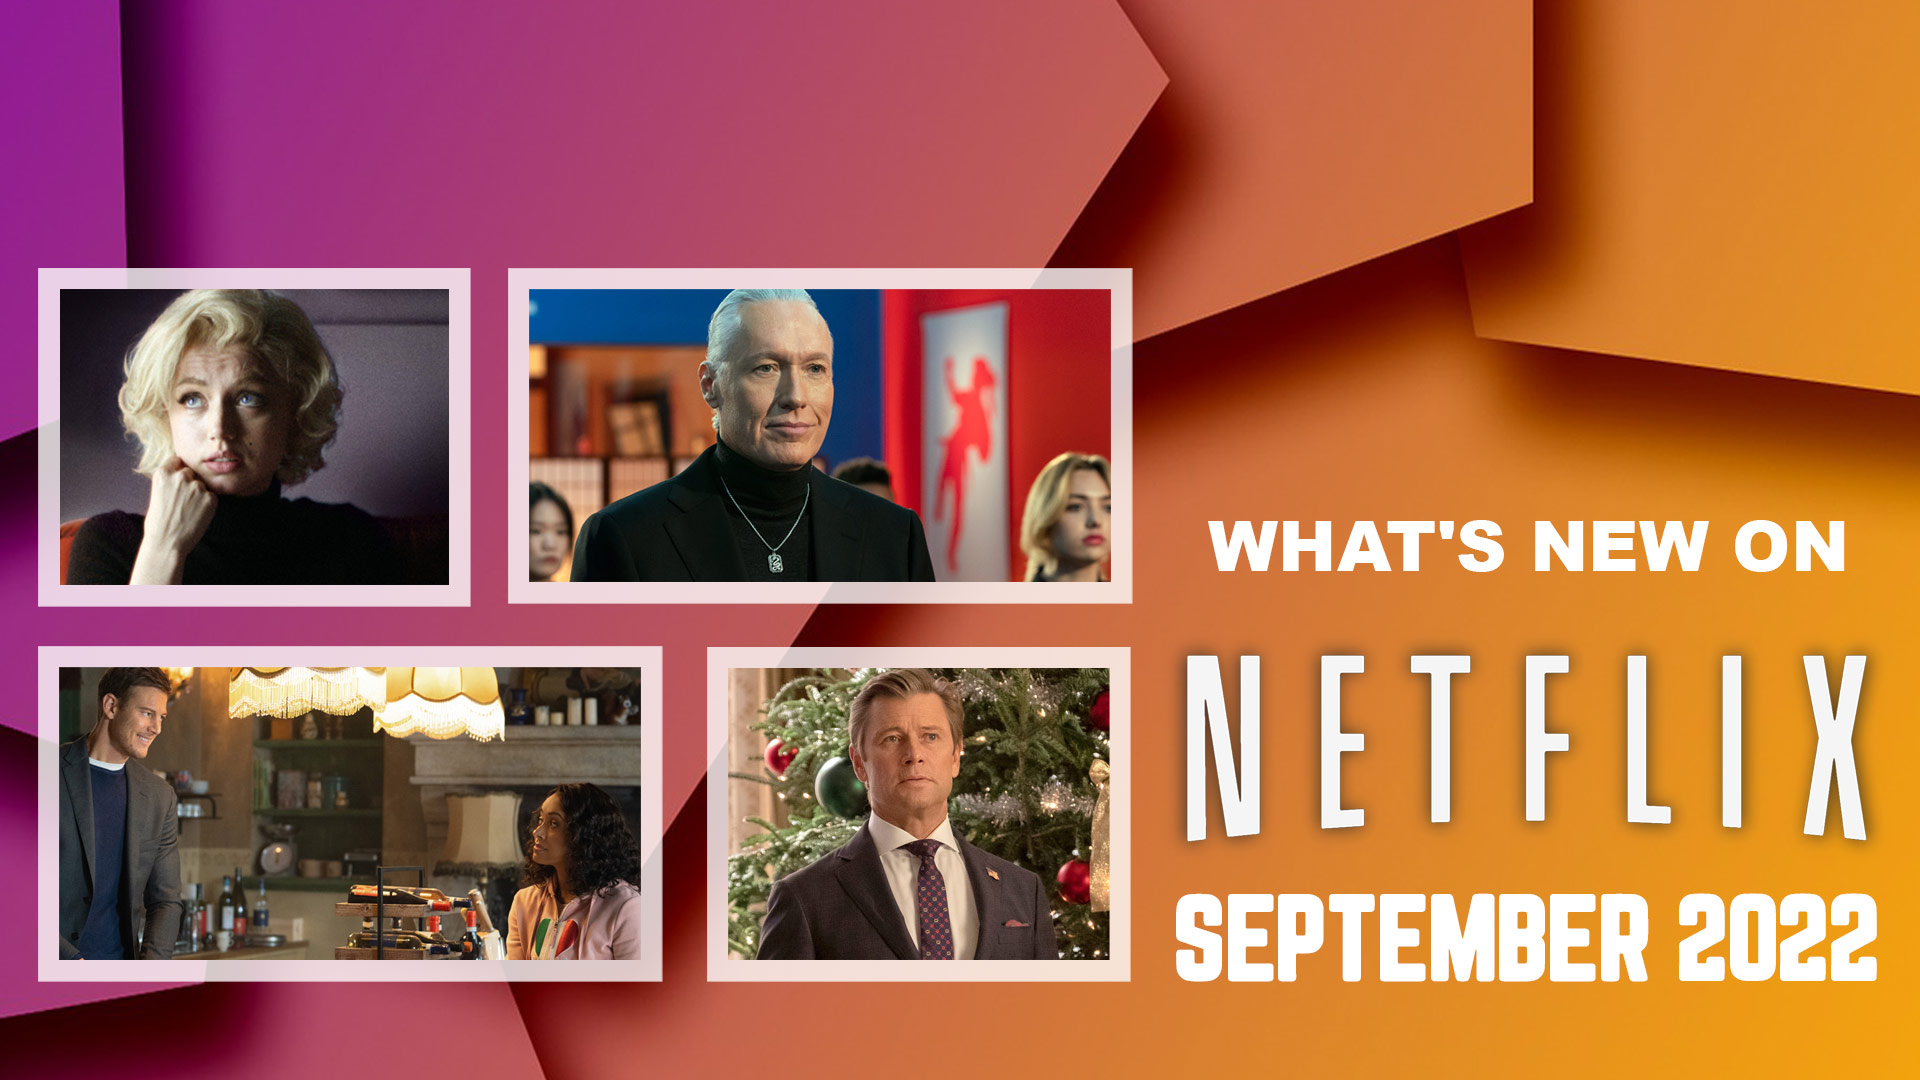 What's New on Netflix Canada September 2022